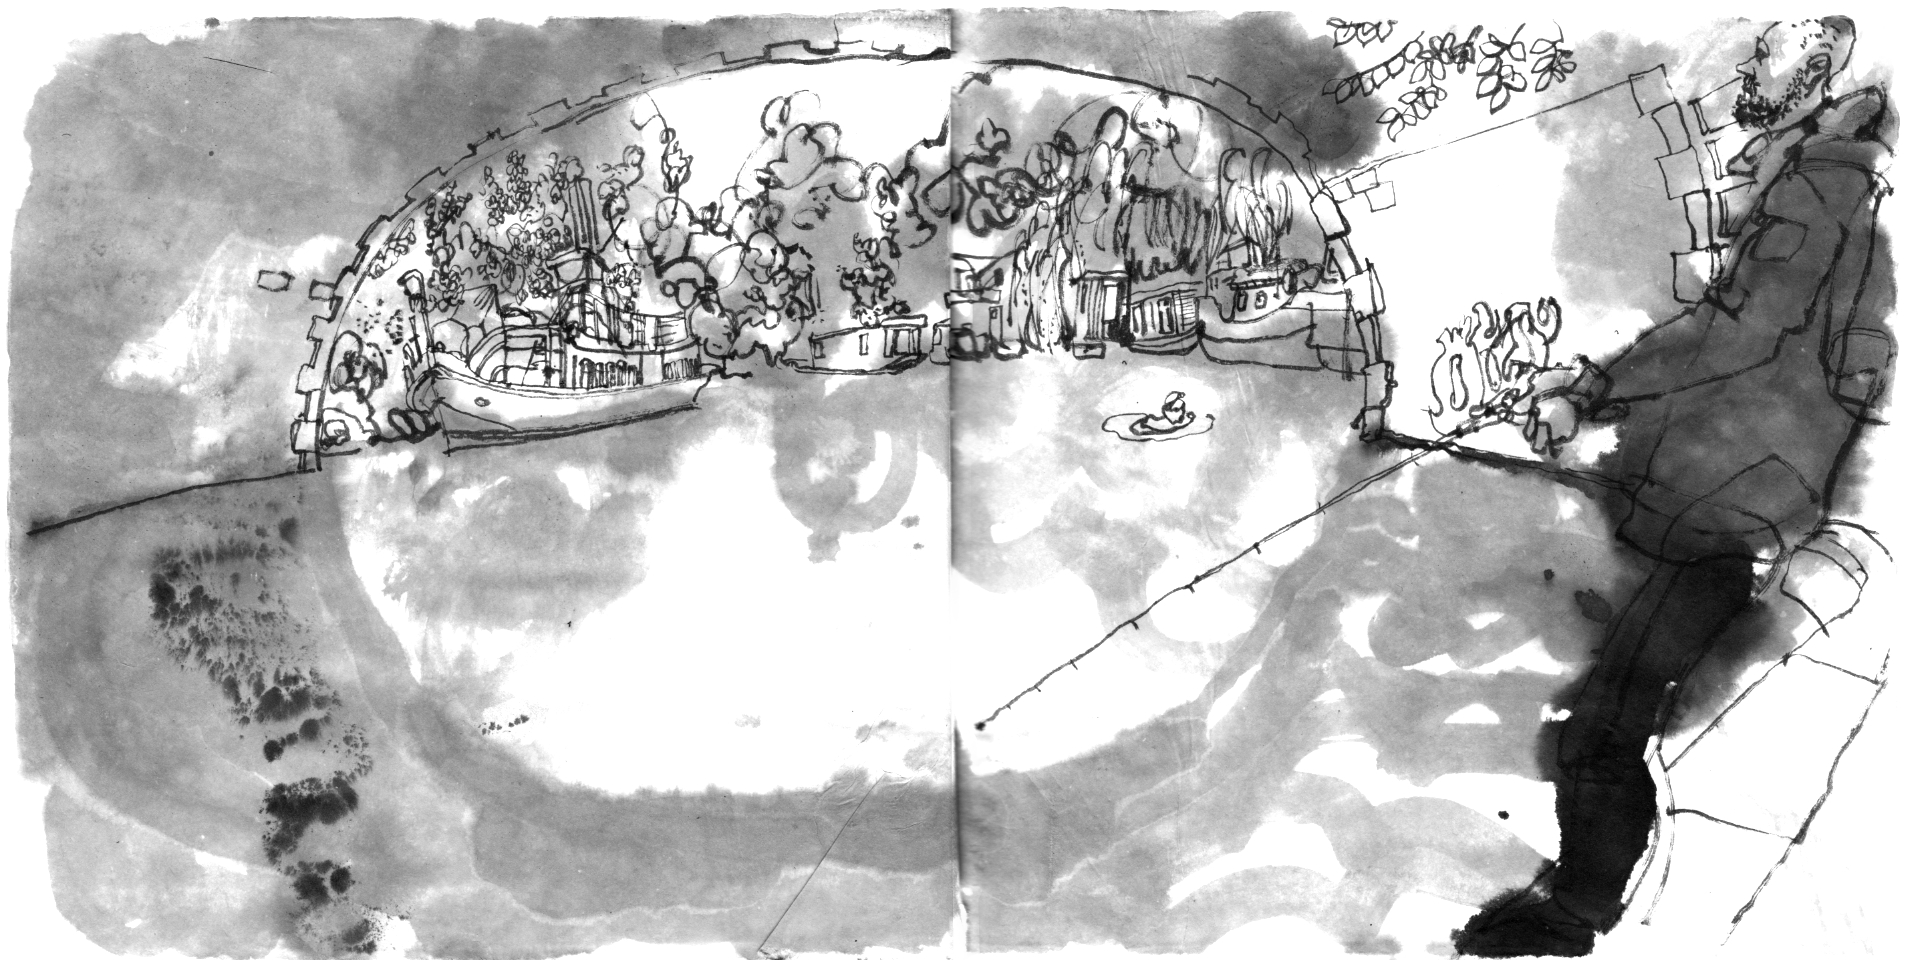 Ink drawing, done by a small canal. In the center of the image is a bowed brick bridge, with its reflection in the water, the canal with boats senn throug the bridge, hed of a swimmer in he canal. In the front right is a bearded man wit h a fishing rod.